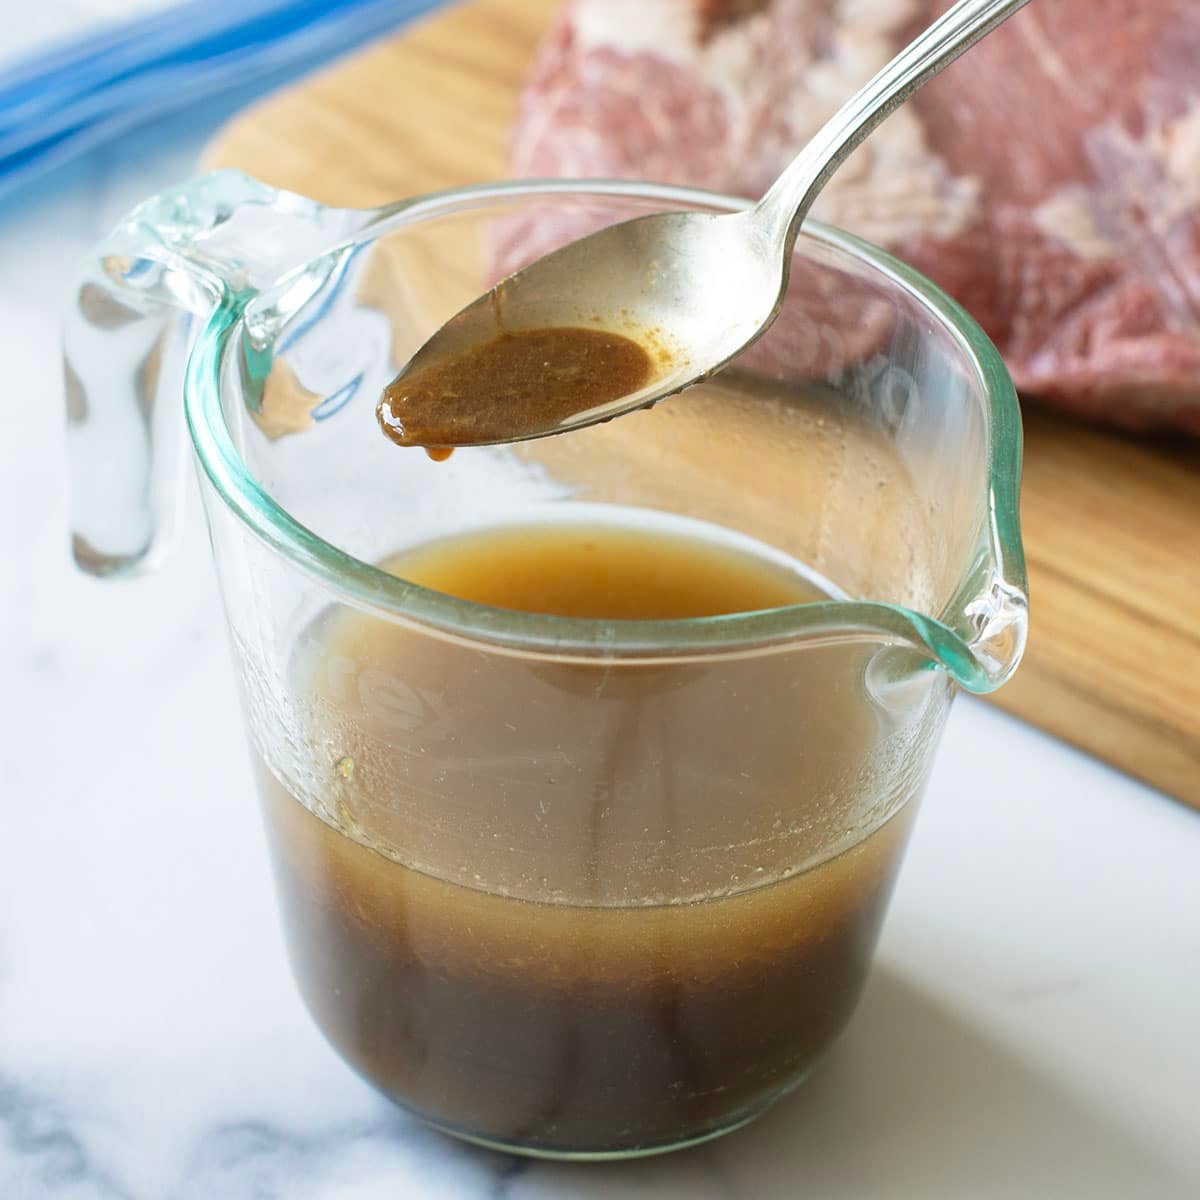 Glass measuring cup with brown marinade, spoonful above it, raw tri-tip in background.